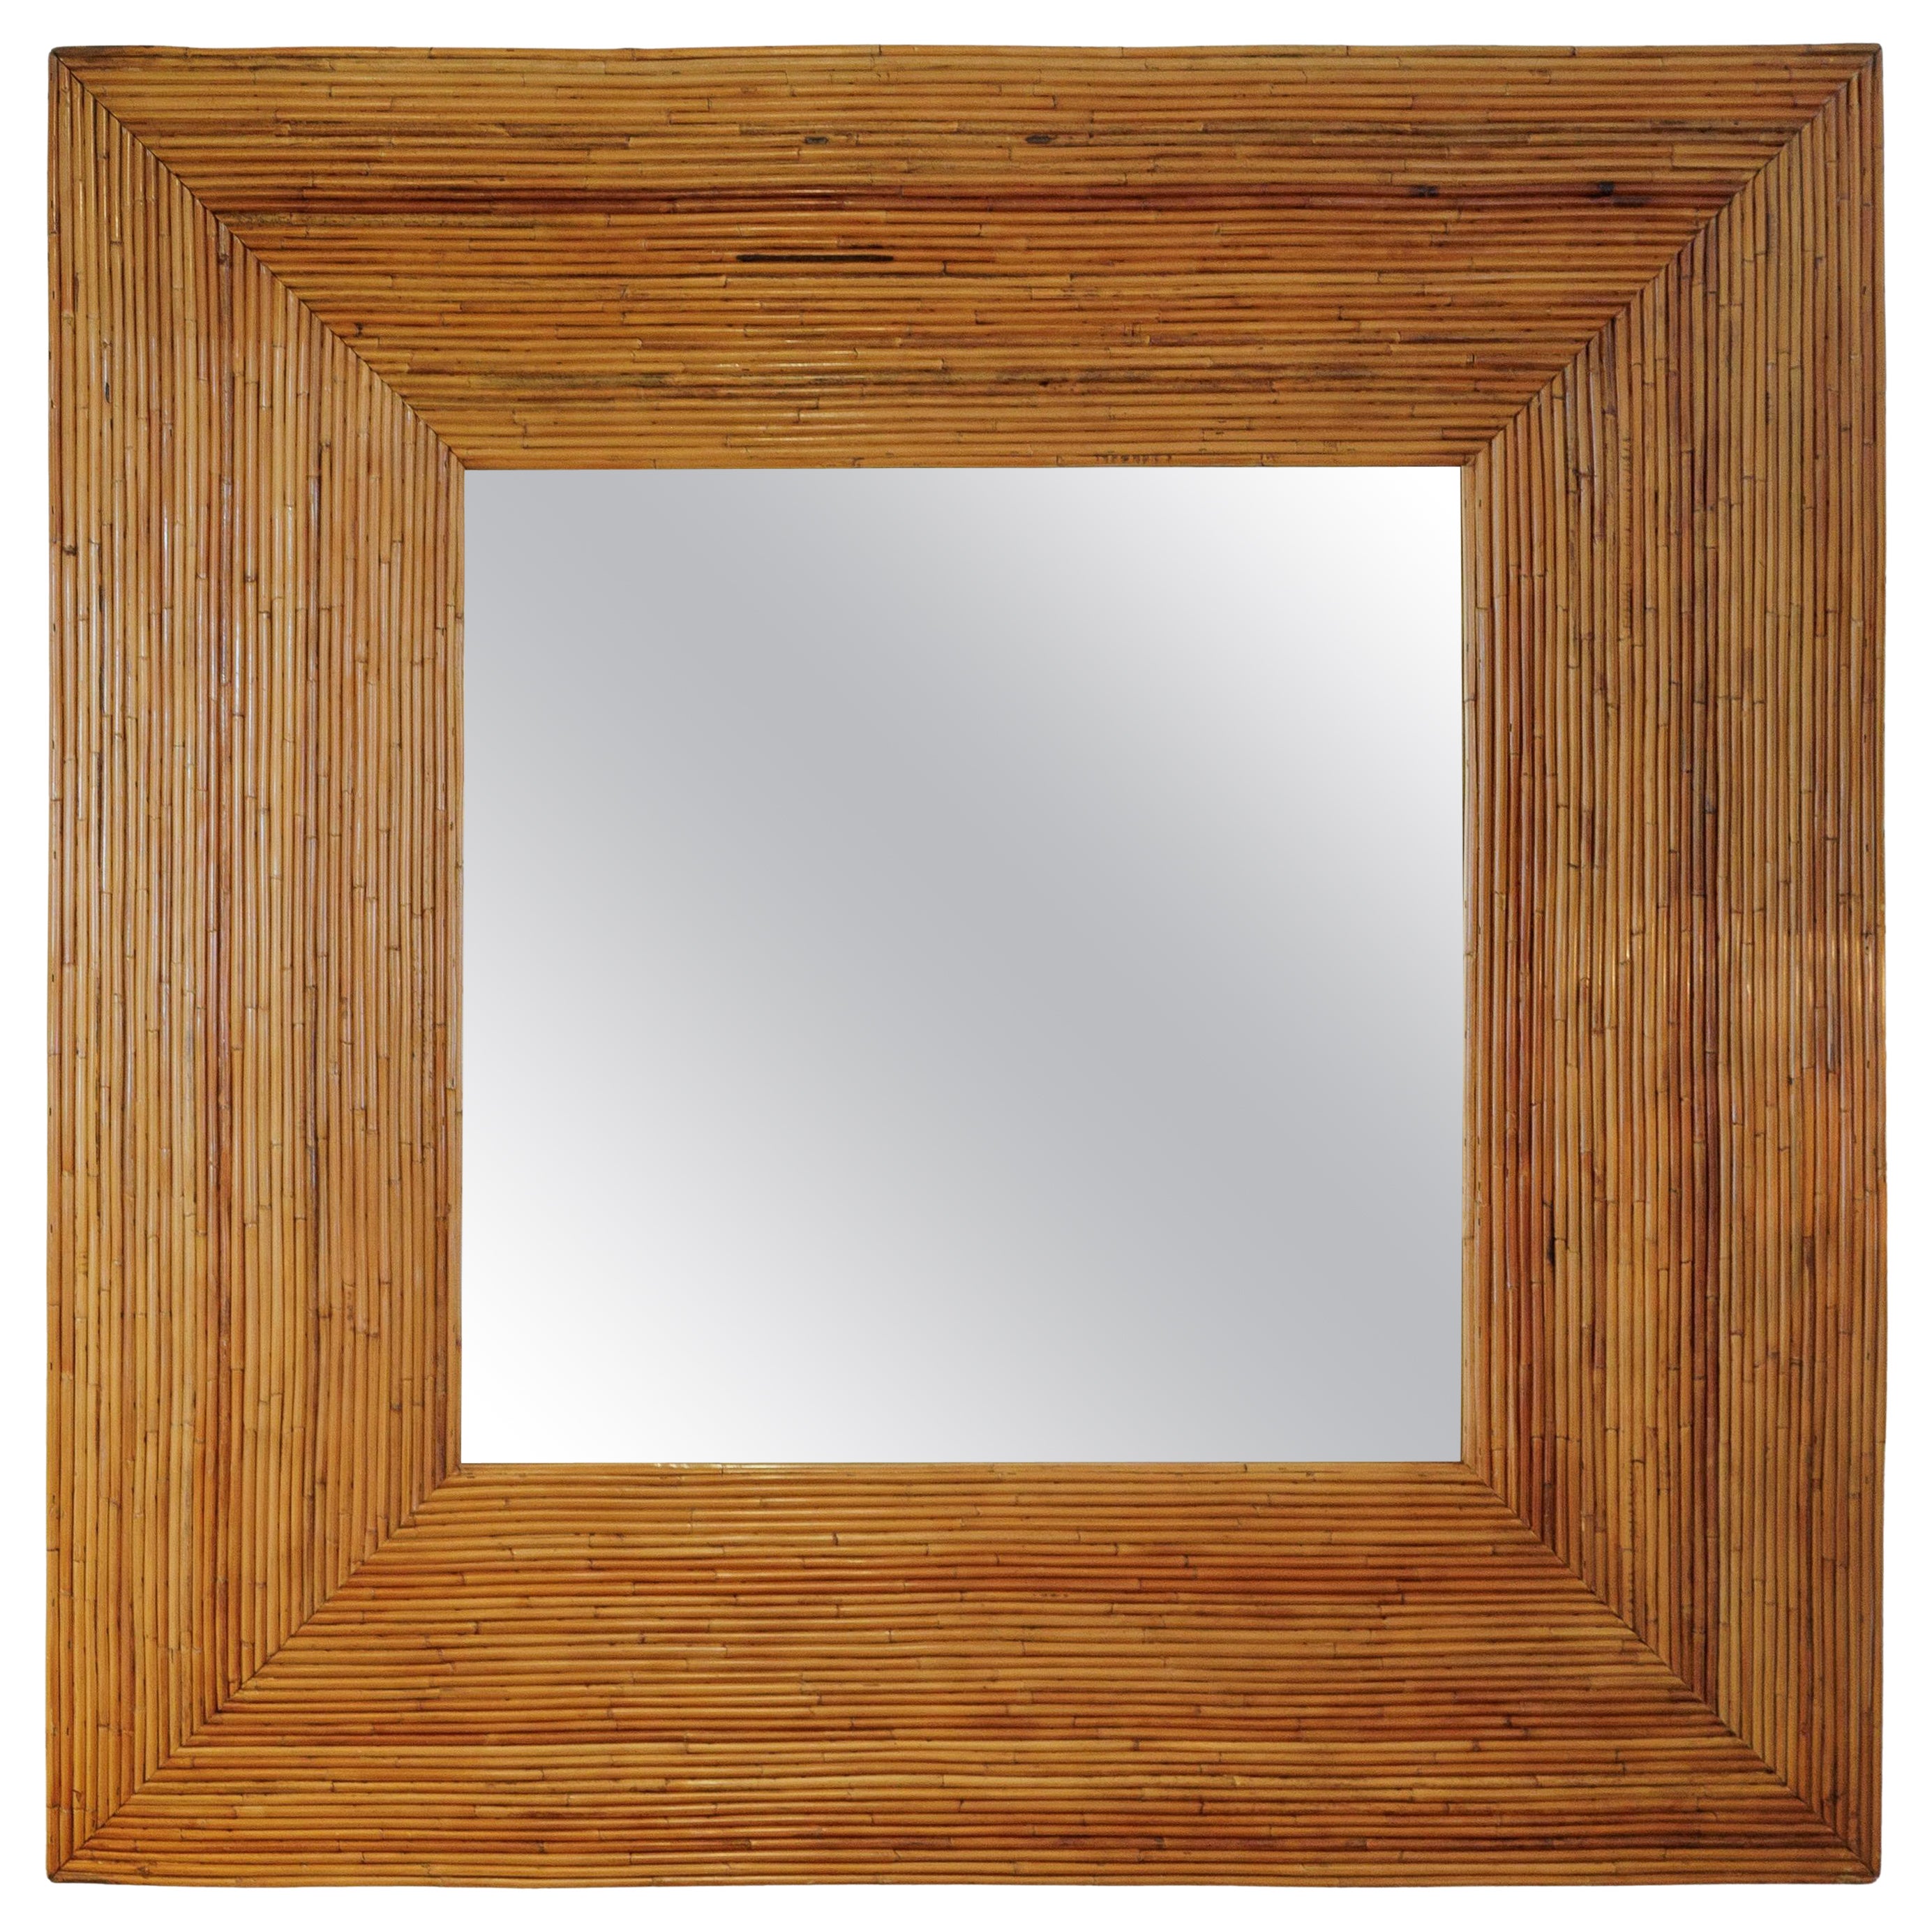 Square Pencil Reed Bamboo Surround Mirror